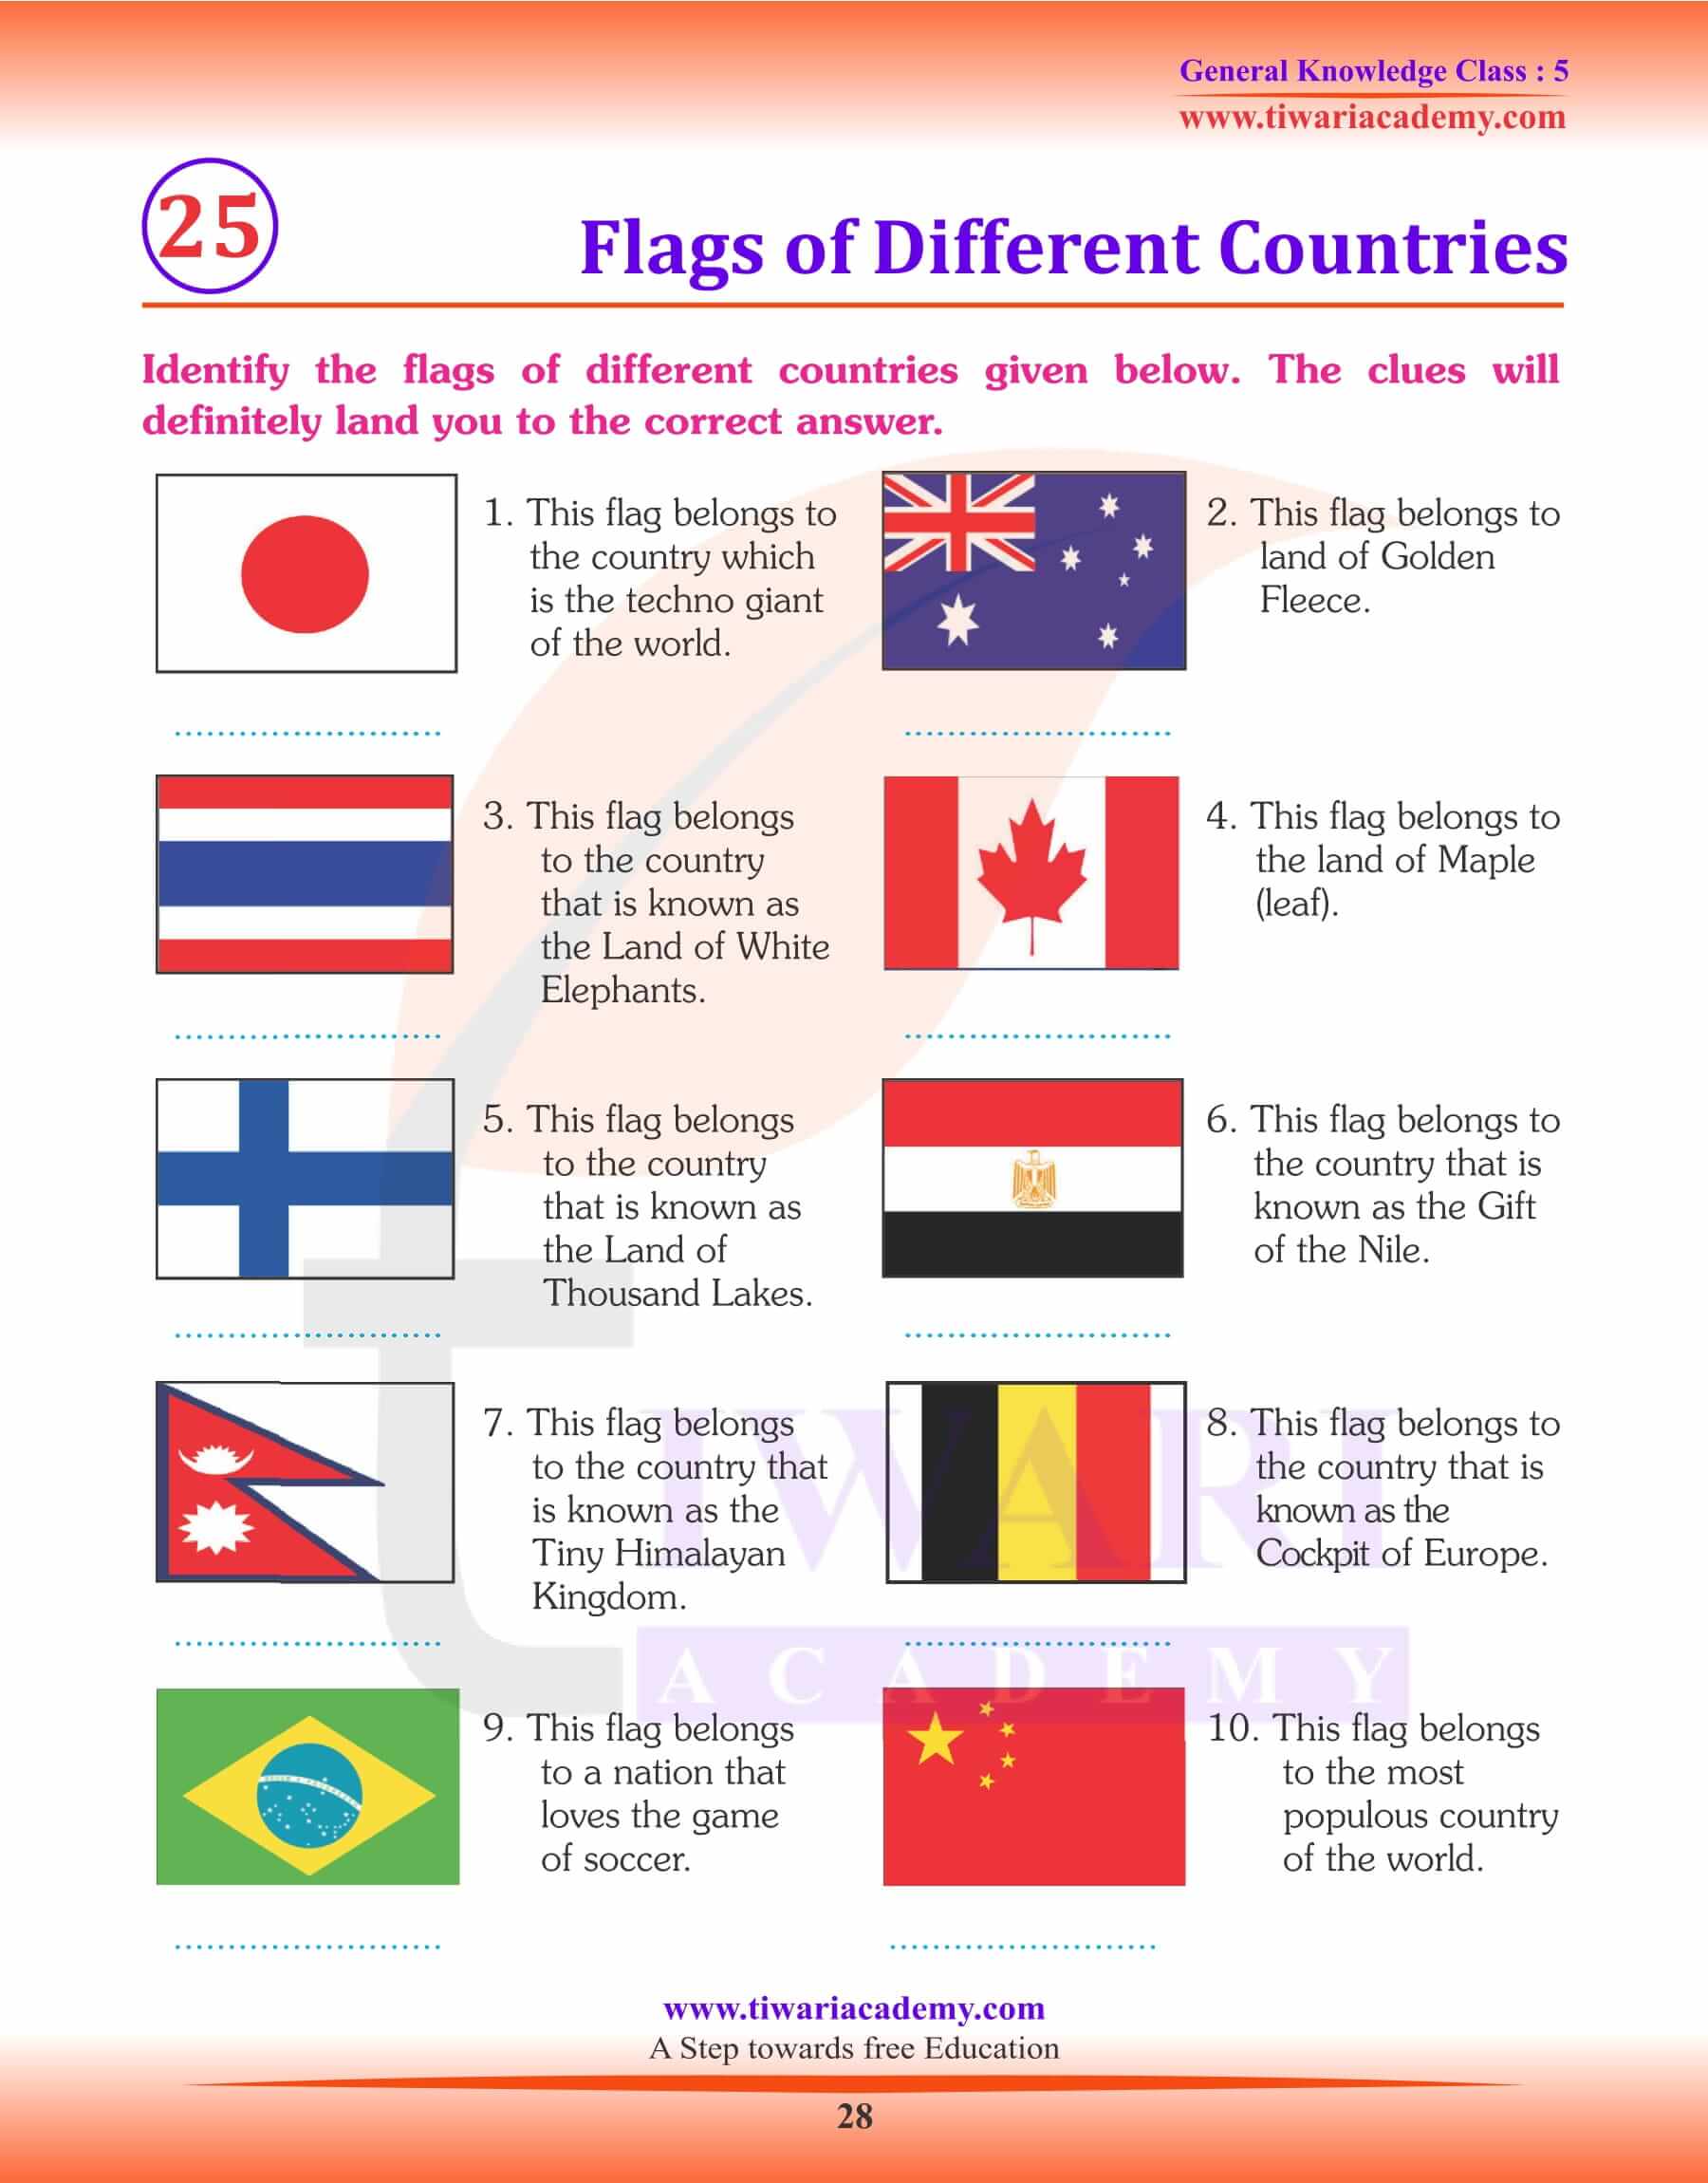 Flag of Different Countries